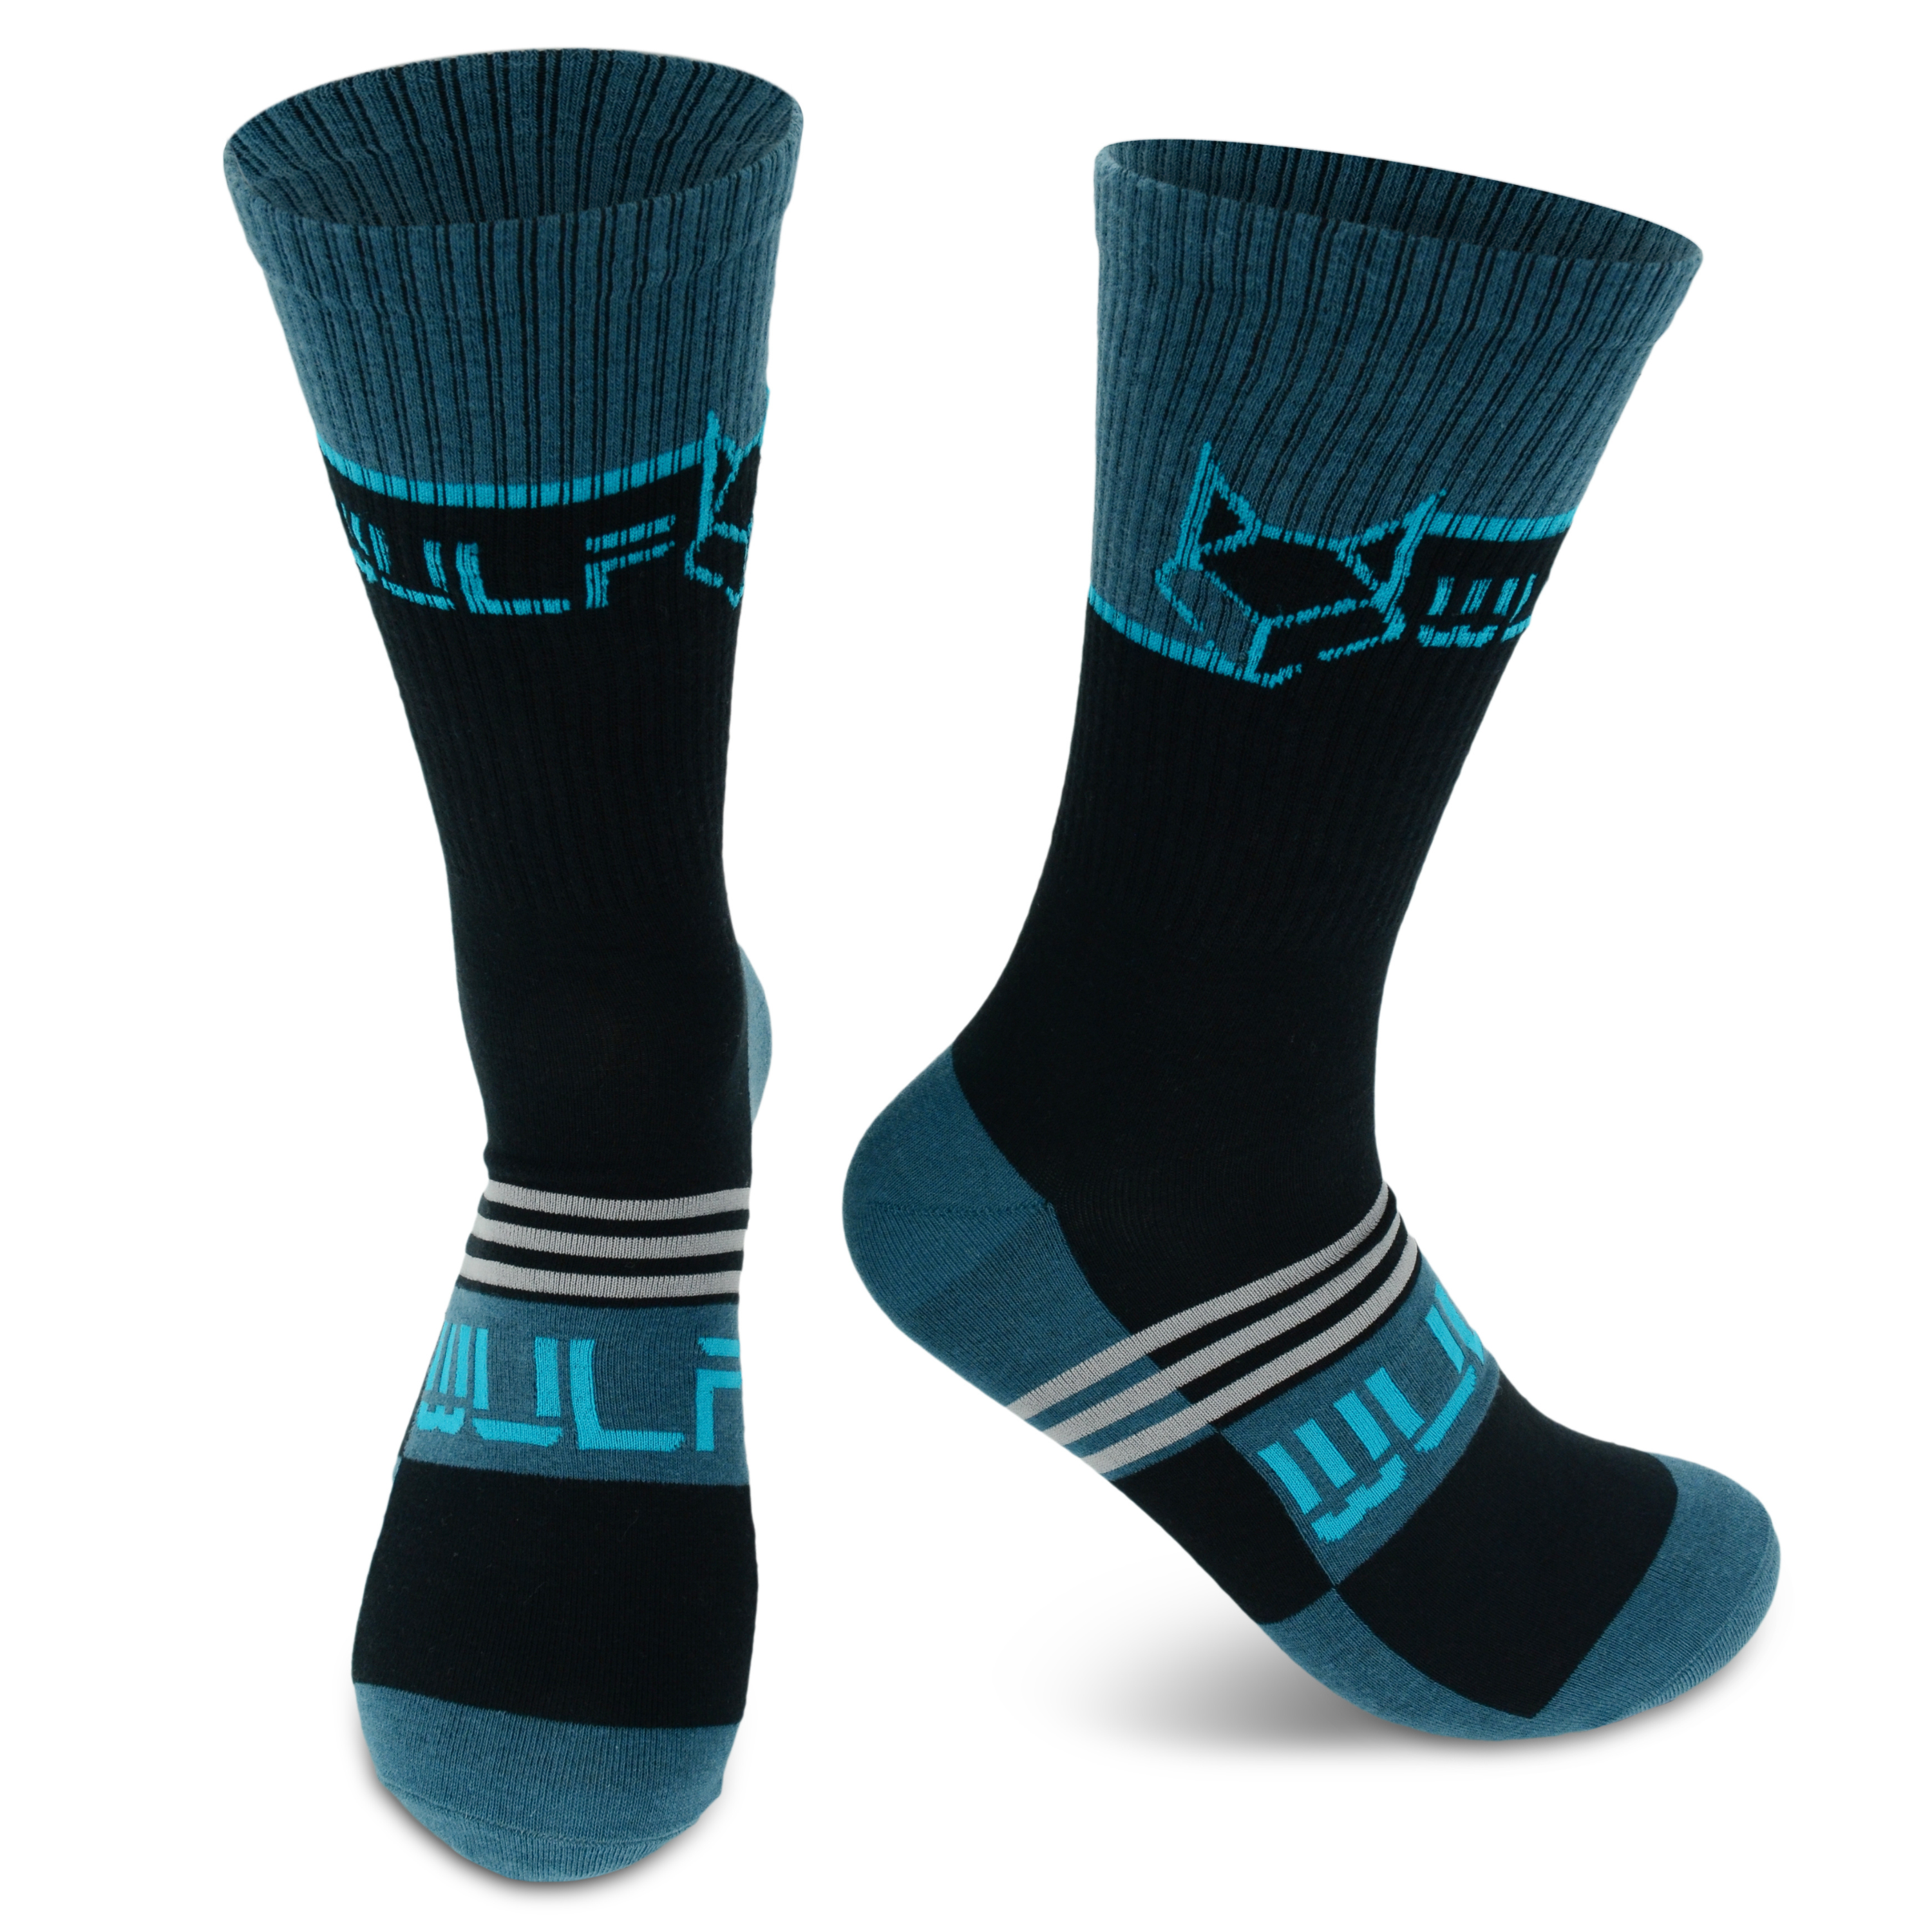 Versatility meets style with our exceptional Wulf-Wear Crew Socks. Whether you're heading to the track or the gym, these socks are designed to complement your athletic clothes and accompany you through any activity. 